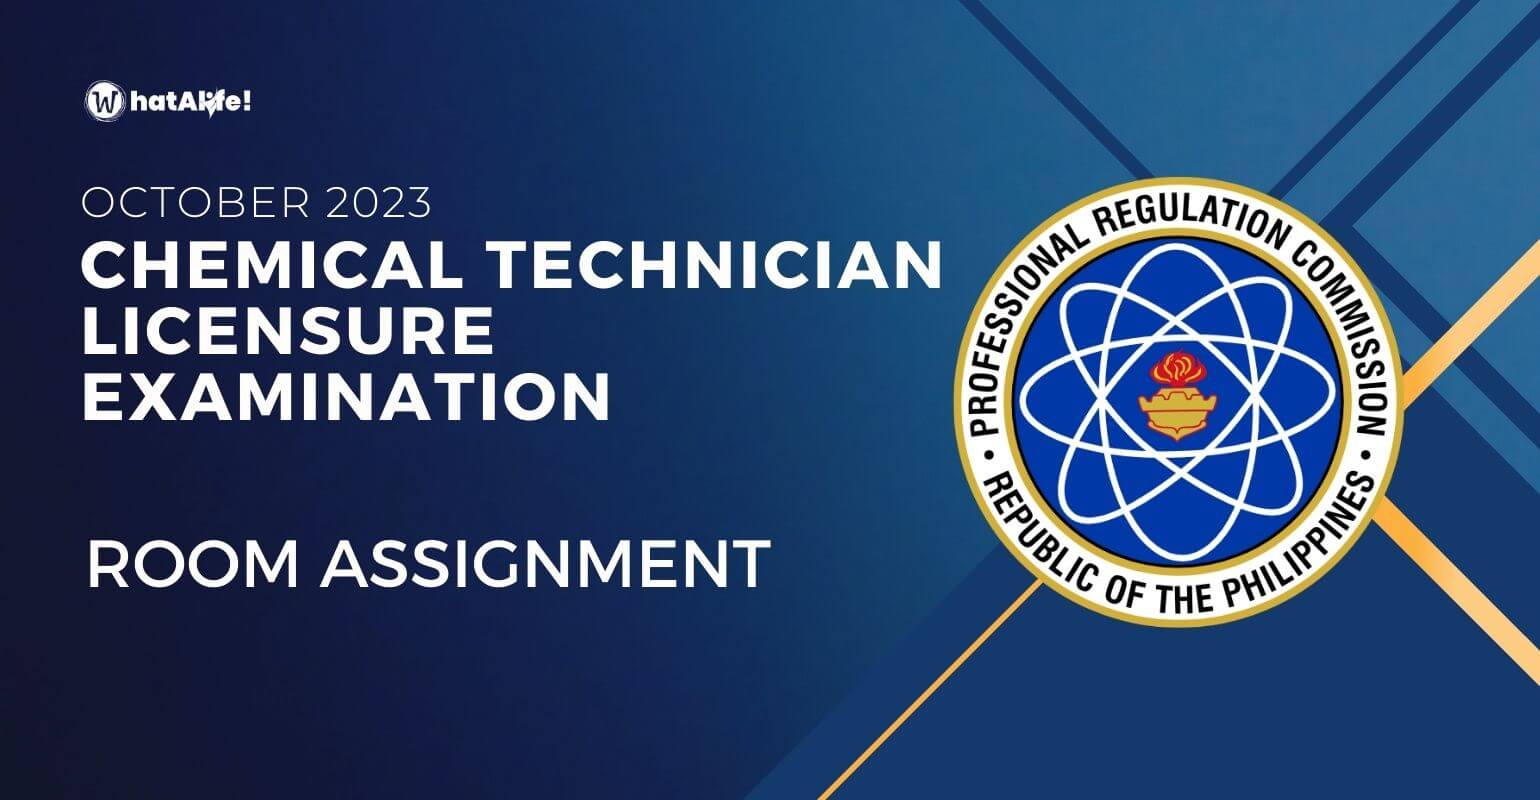 Room Assignment — Chemical Technicians Licensure Exam October 2023